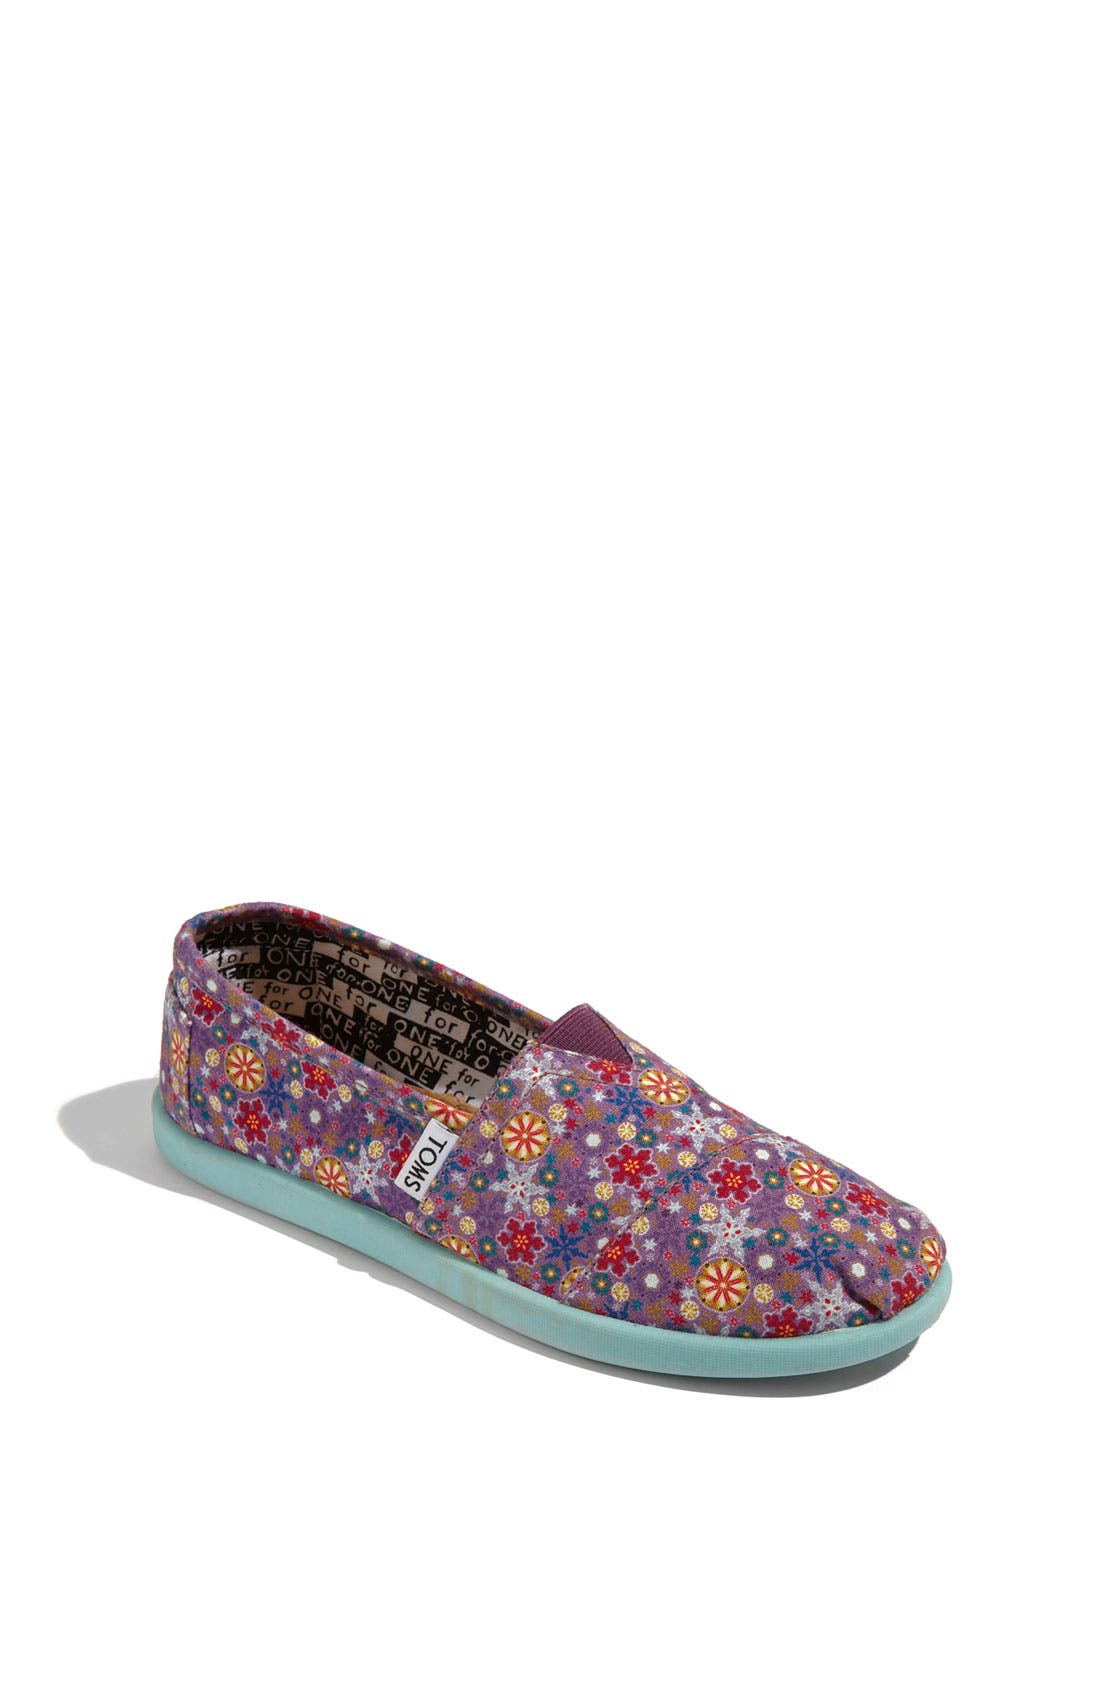 toms snowflake shoes